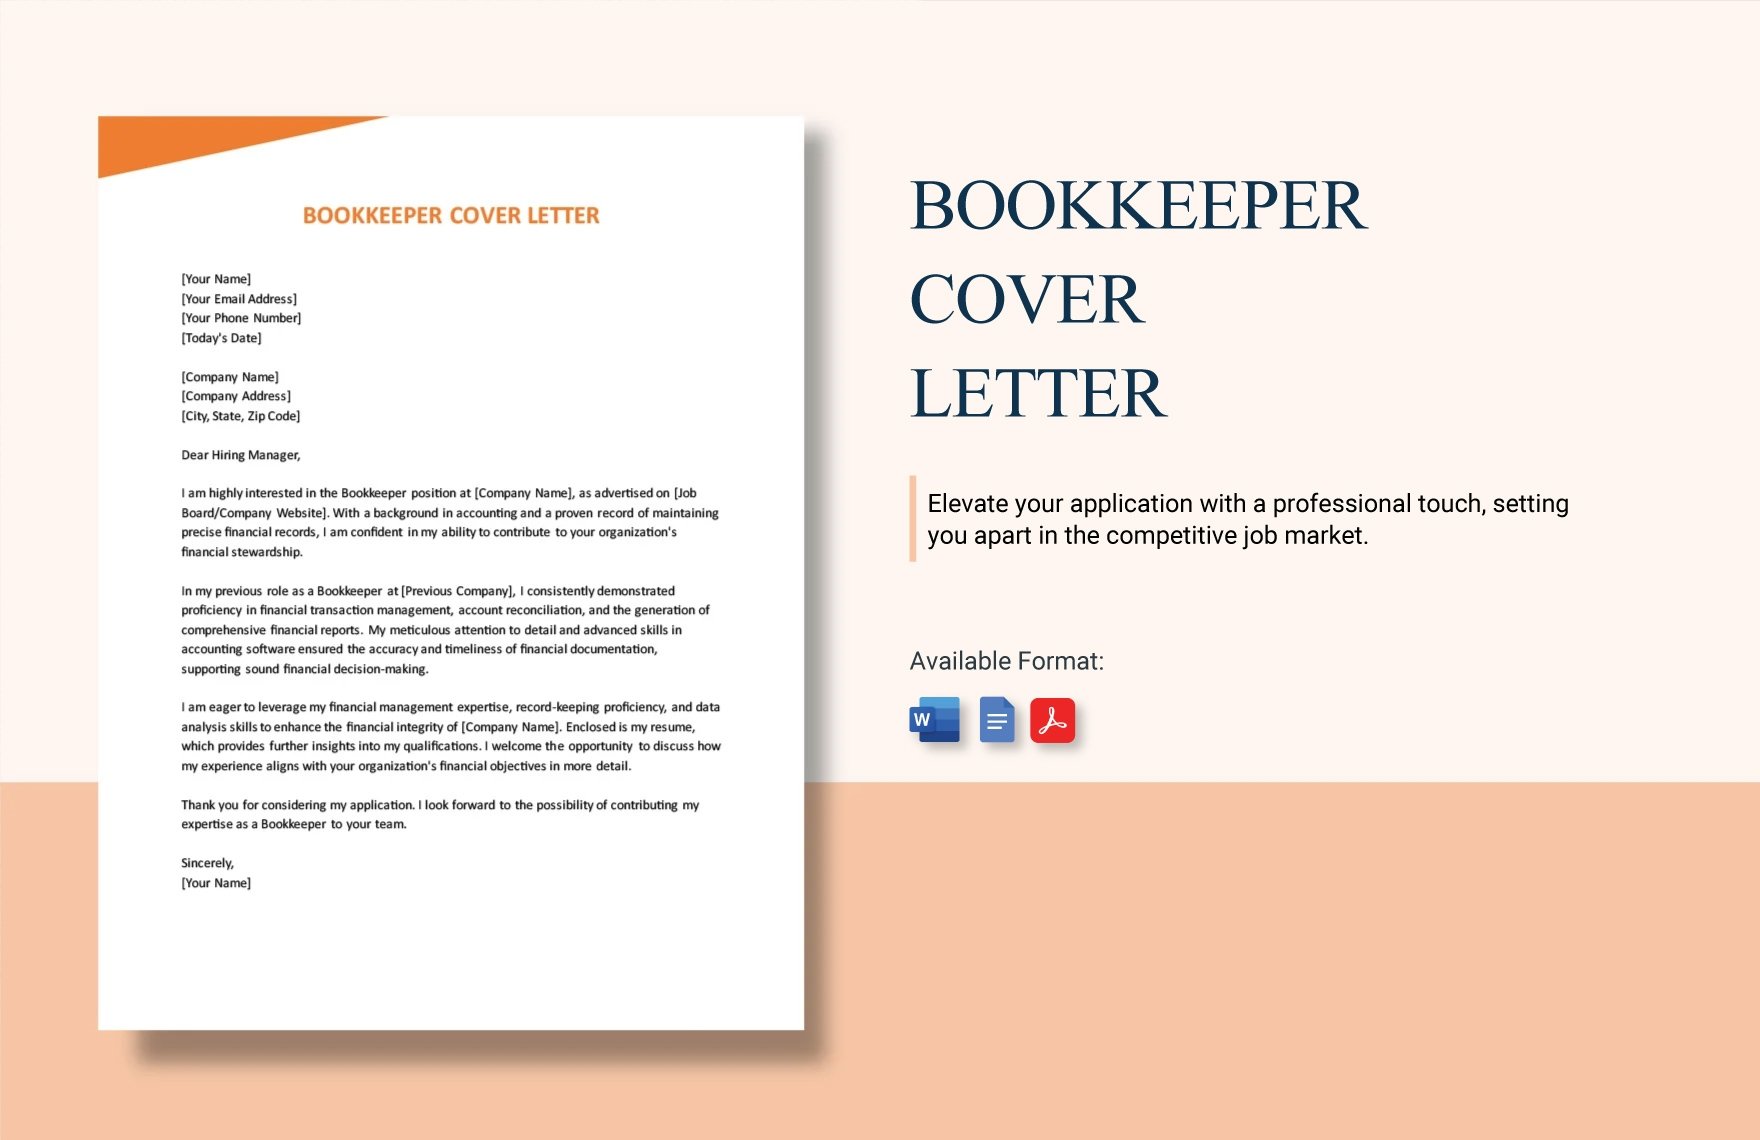 Bookkeeper Cover Letter in Word, Google Docs, PDF